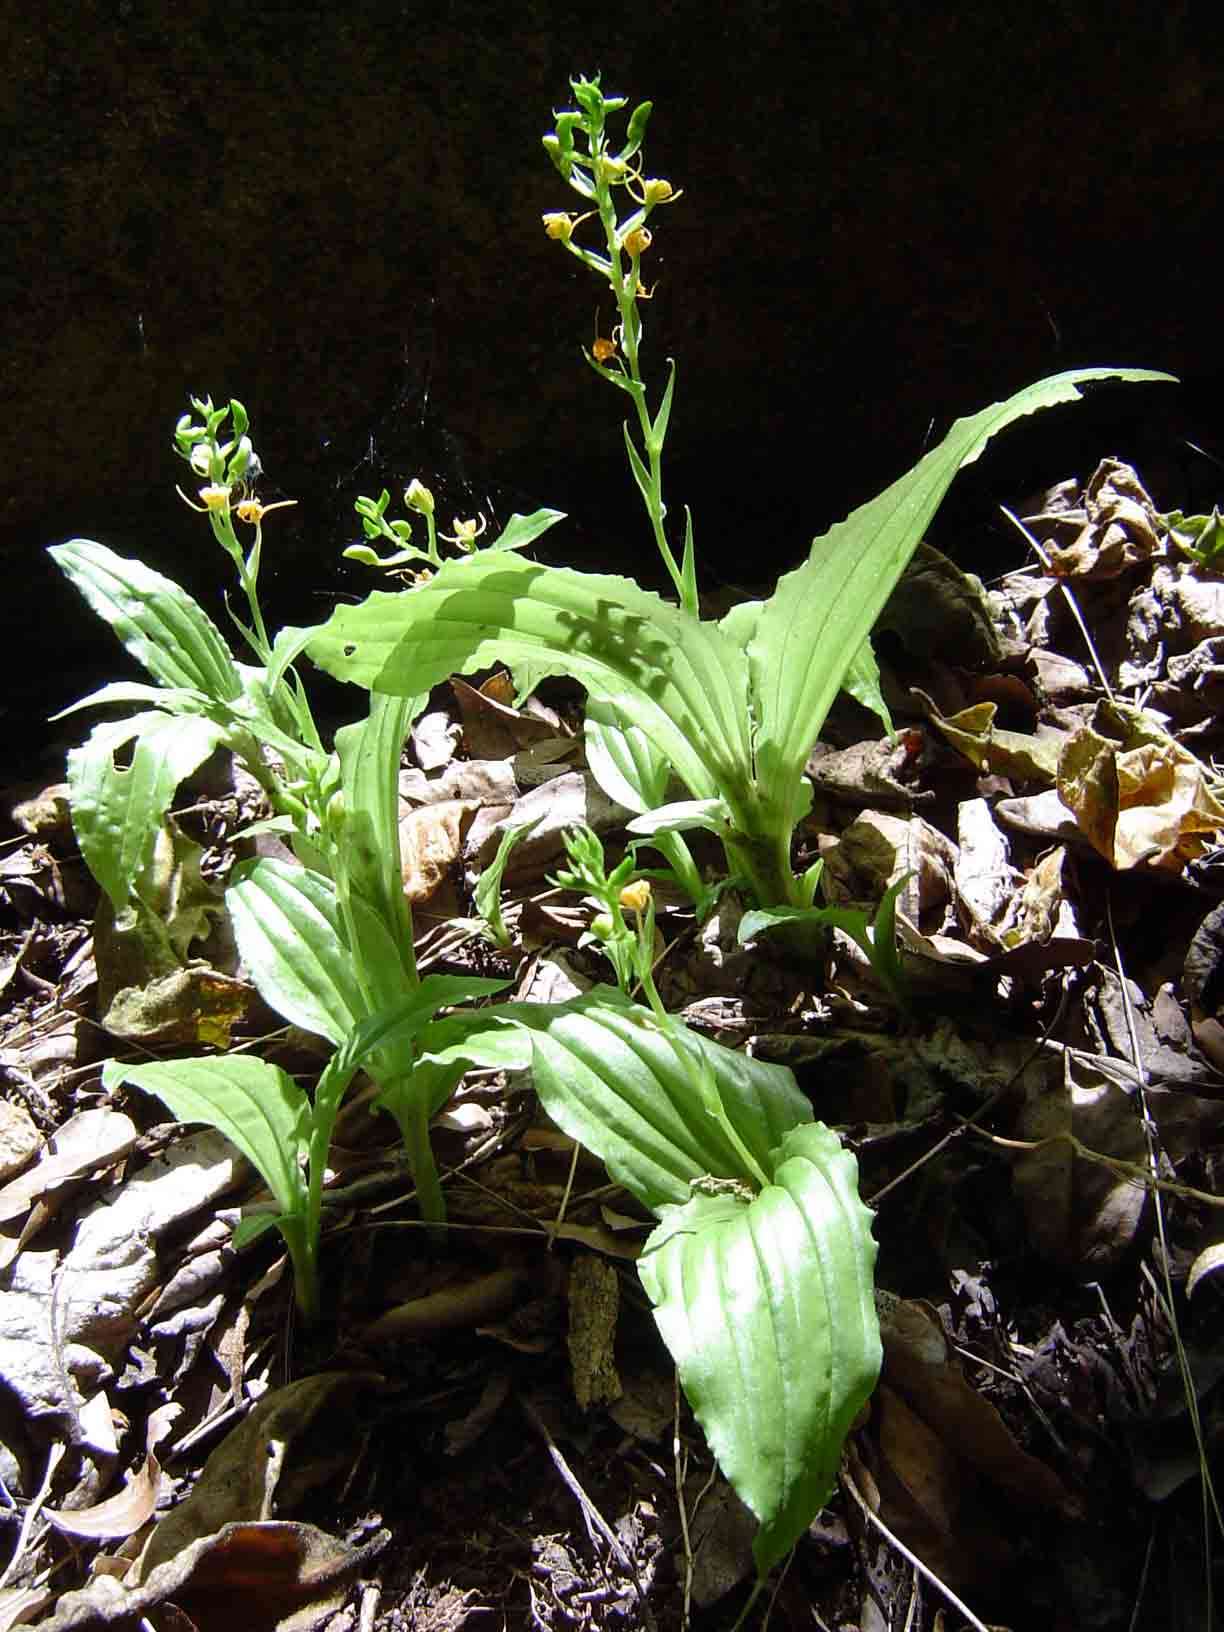 Image of Widelip orchid